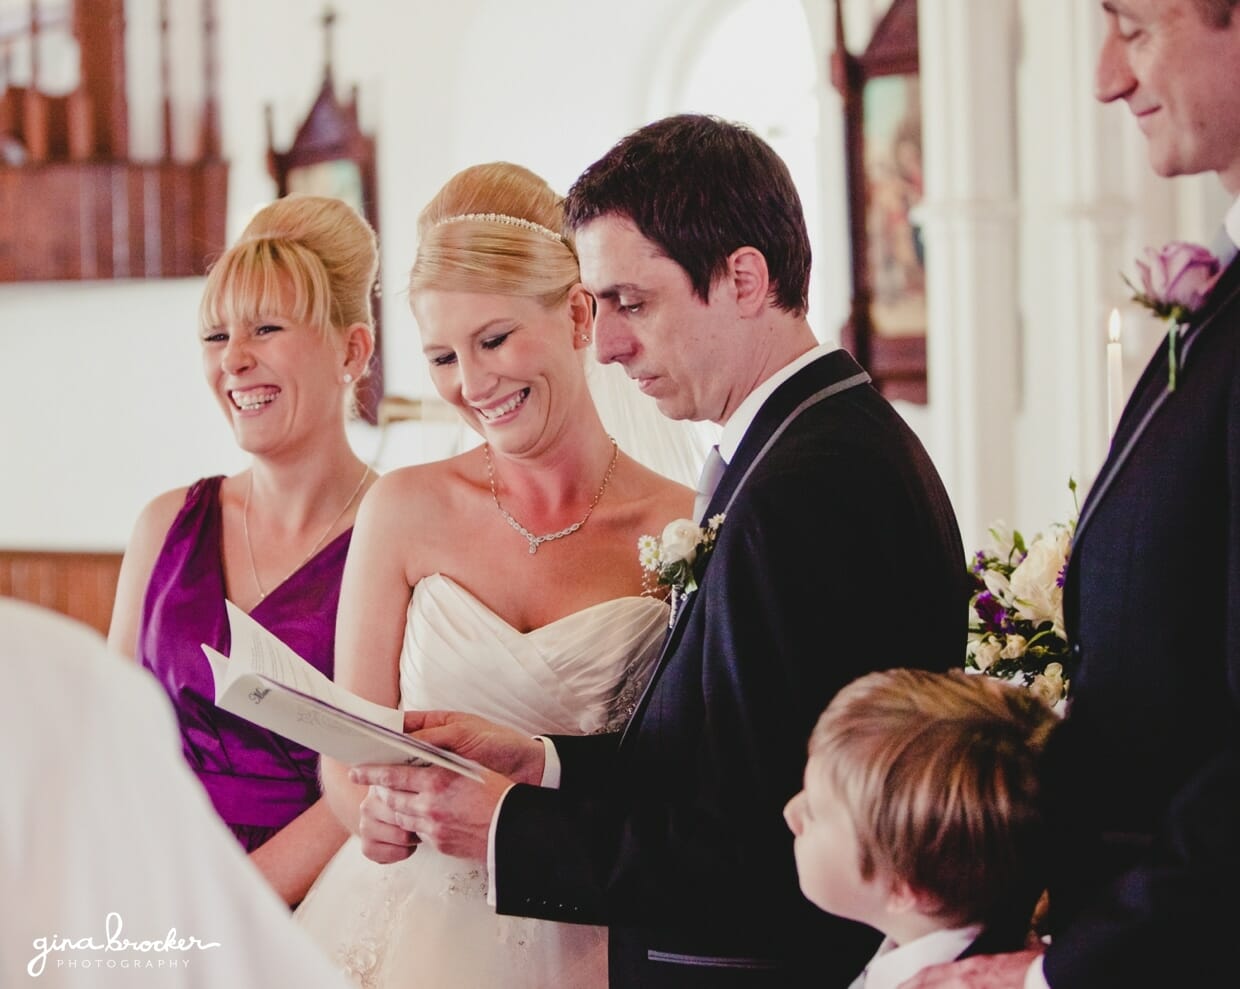 The bride and her bridesmaid smile while groom says his vows during their wedding ceremony is a small church